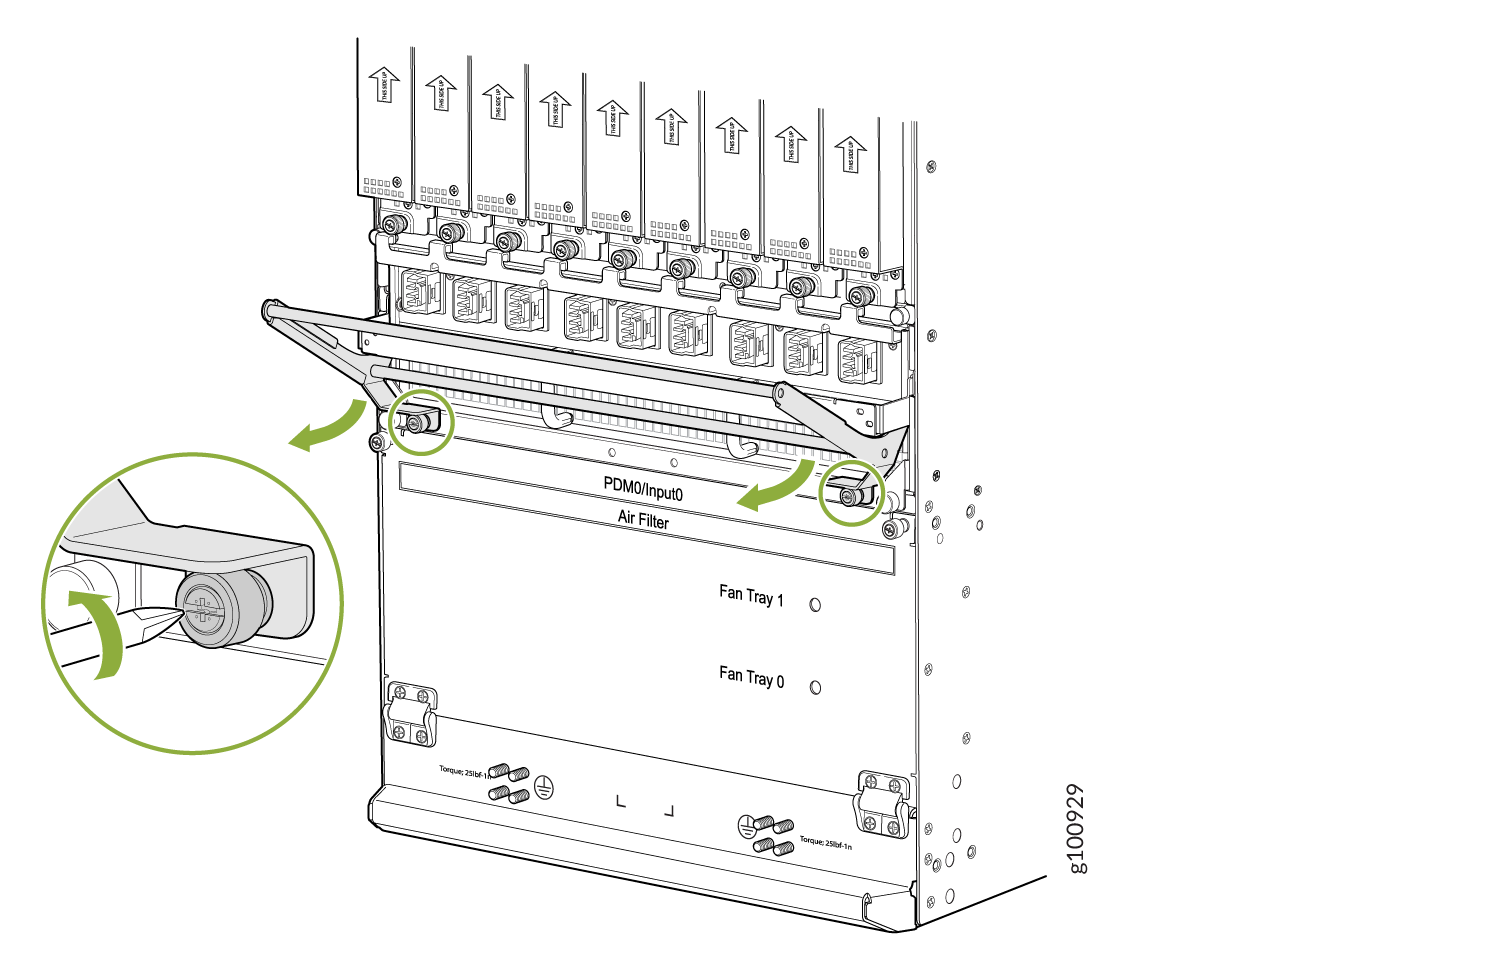 Removing the DC Cable Manager for DC PDM (240 V China) and the Universal (HVAC/HVDC) PDM